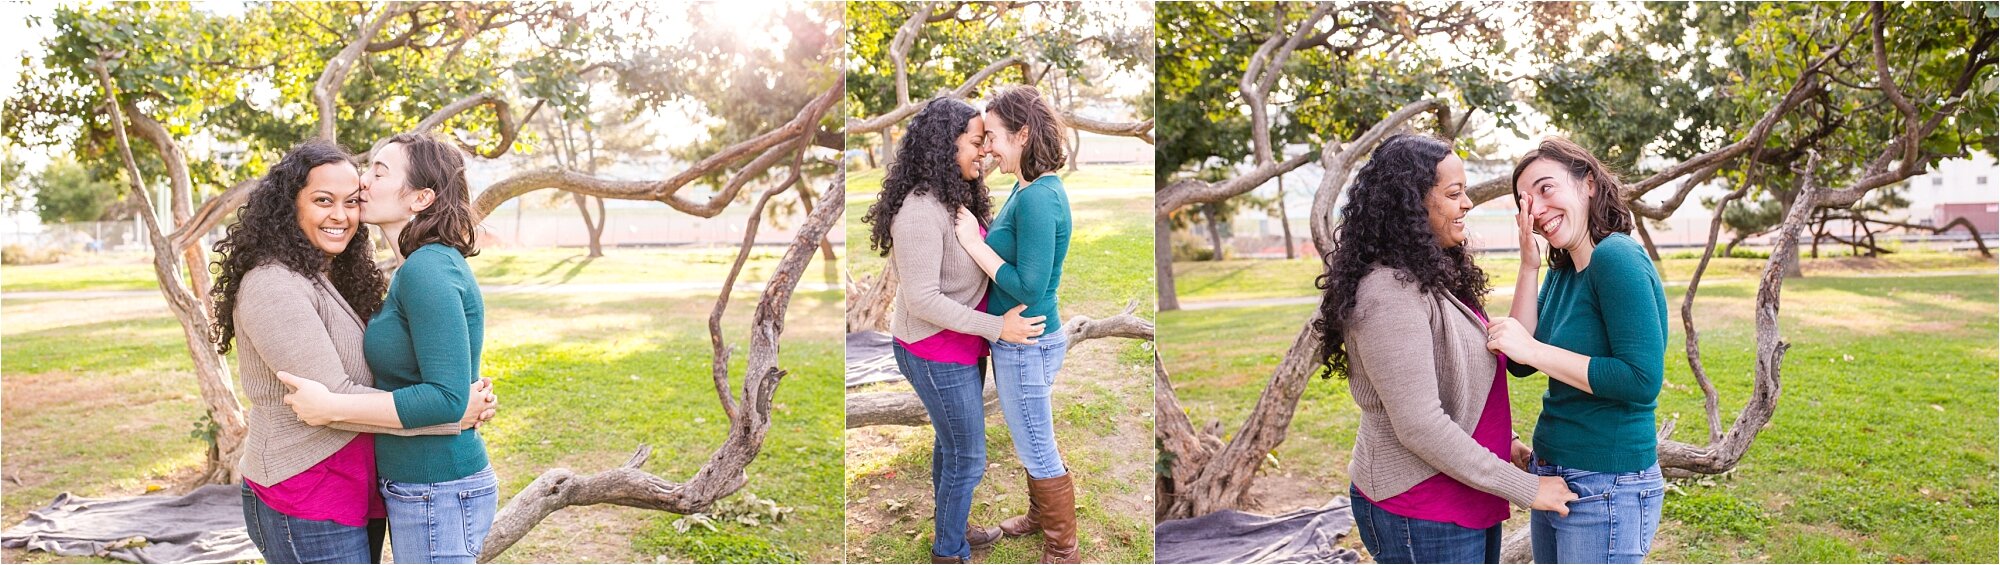 Gay lesbian mommies hold, embrace, and kiss each other, cry together, Family Photography Philadelphia